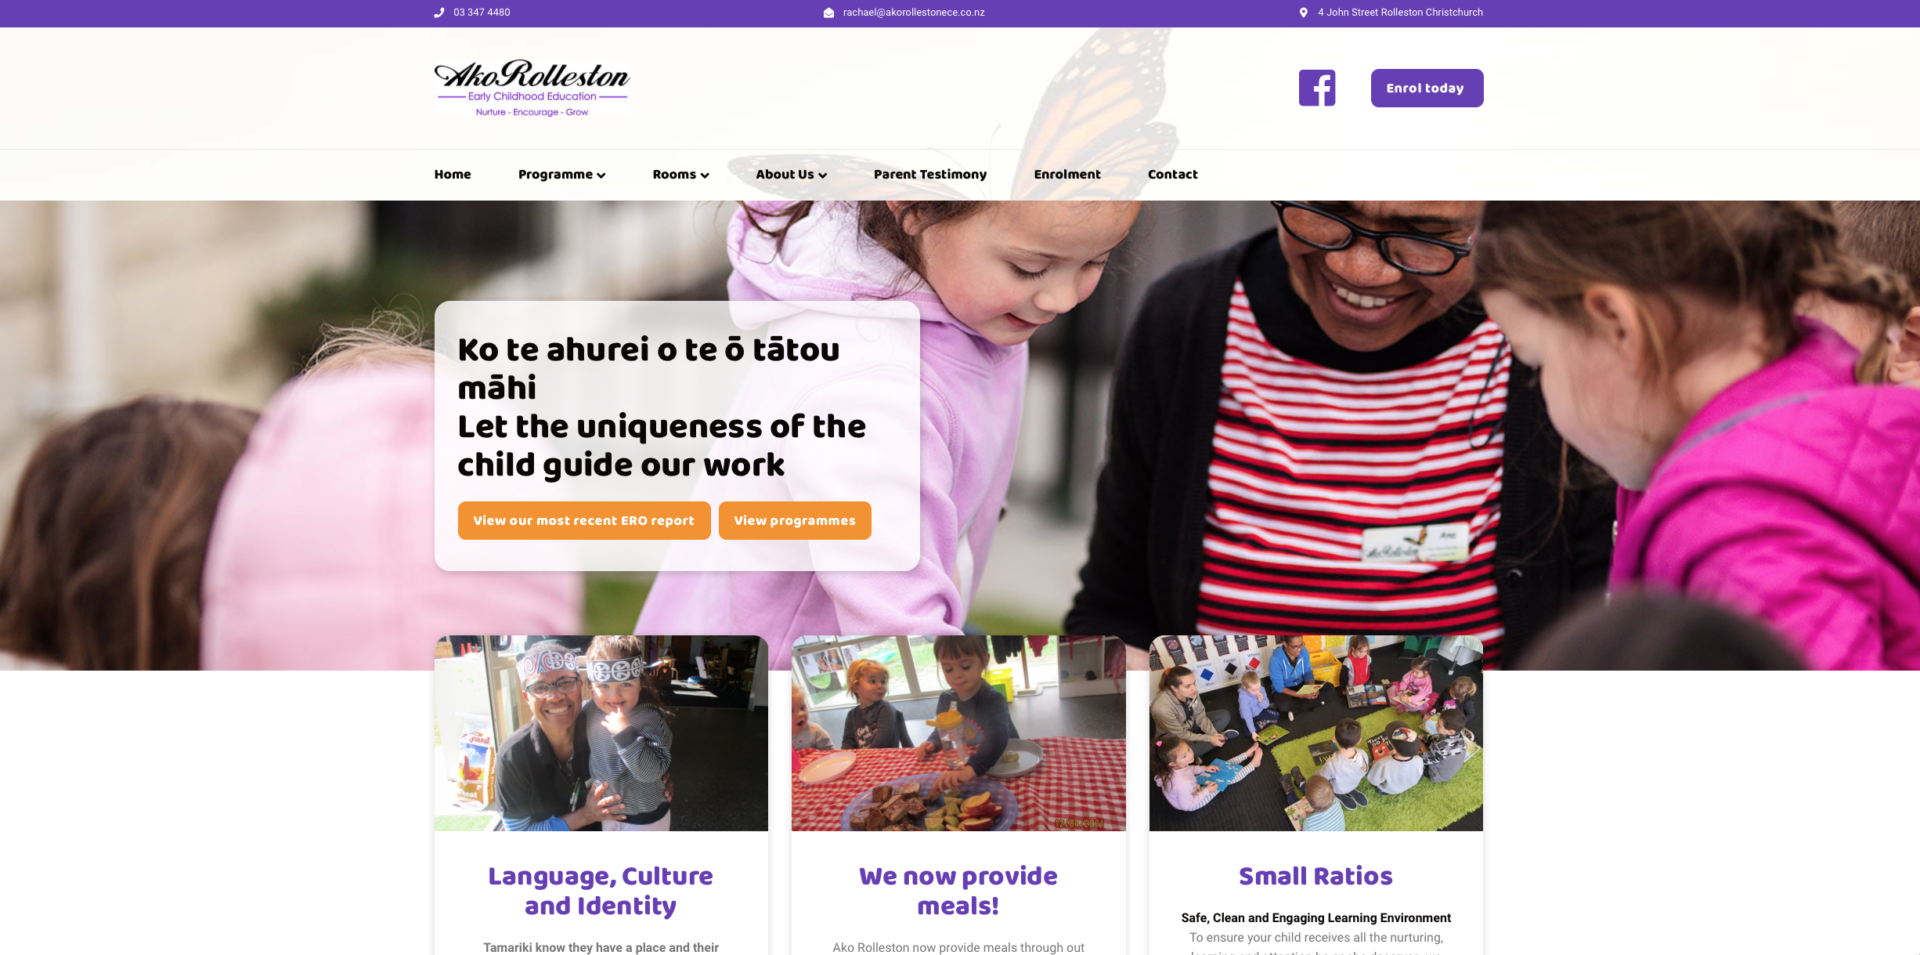 Ako Pre school Rolleston NZ - website design and development with a striking purple colour symbolizing kids and fun. Based in Rolleston, Selwyn and Christchurch. This is WordPress website design trying to show you there is more fun and learning at this small establishment than you think